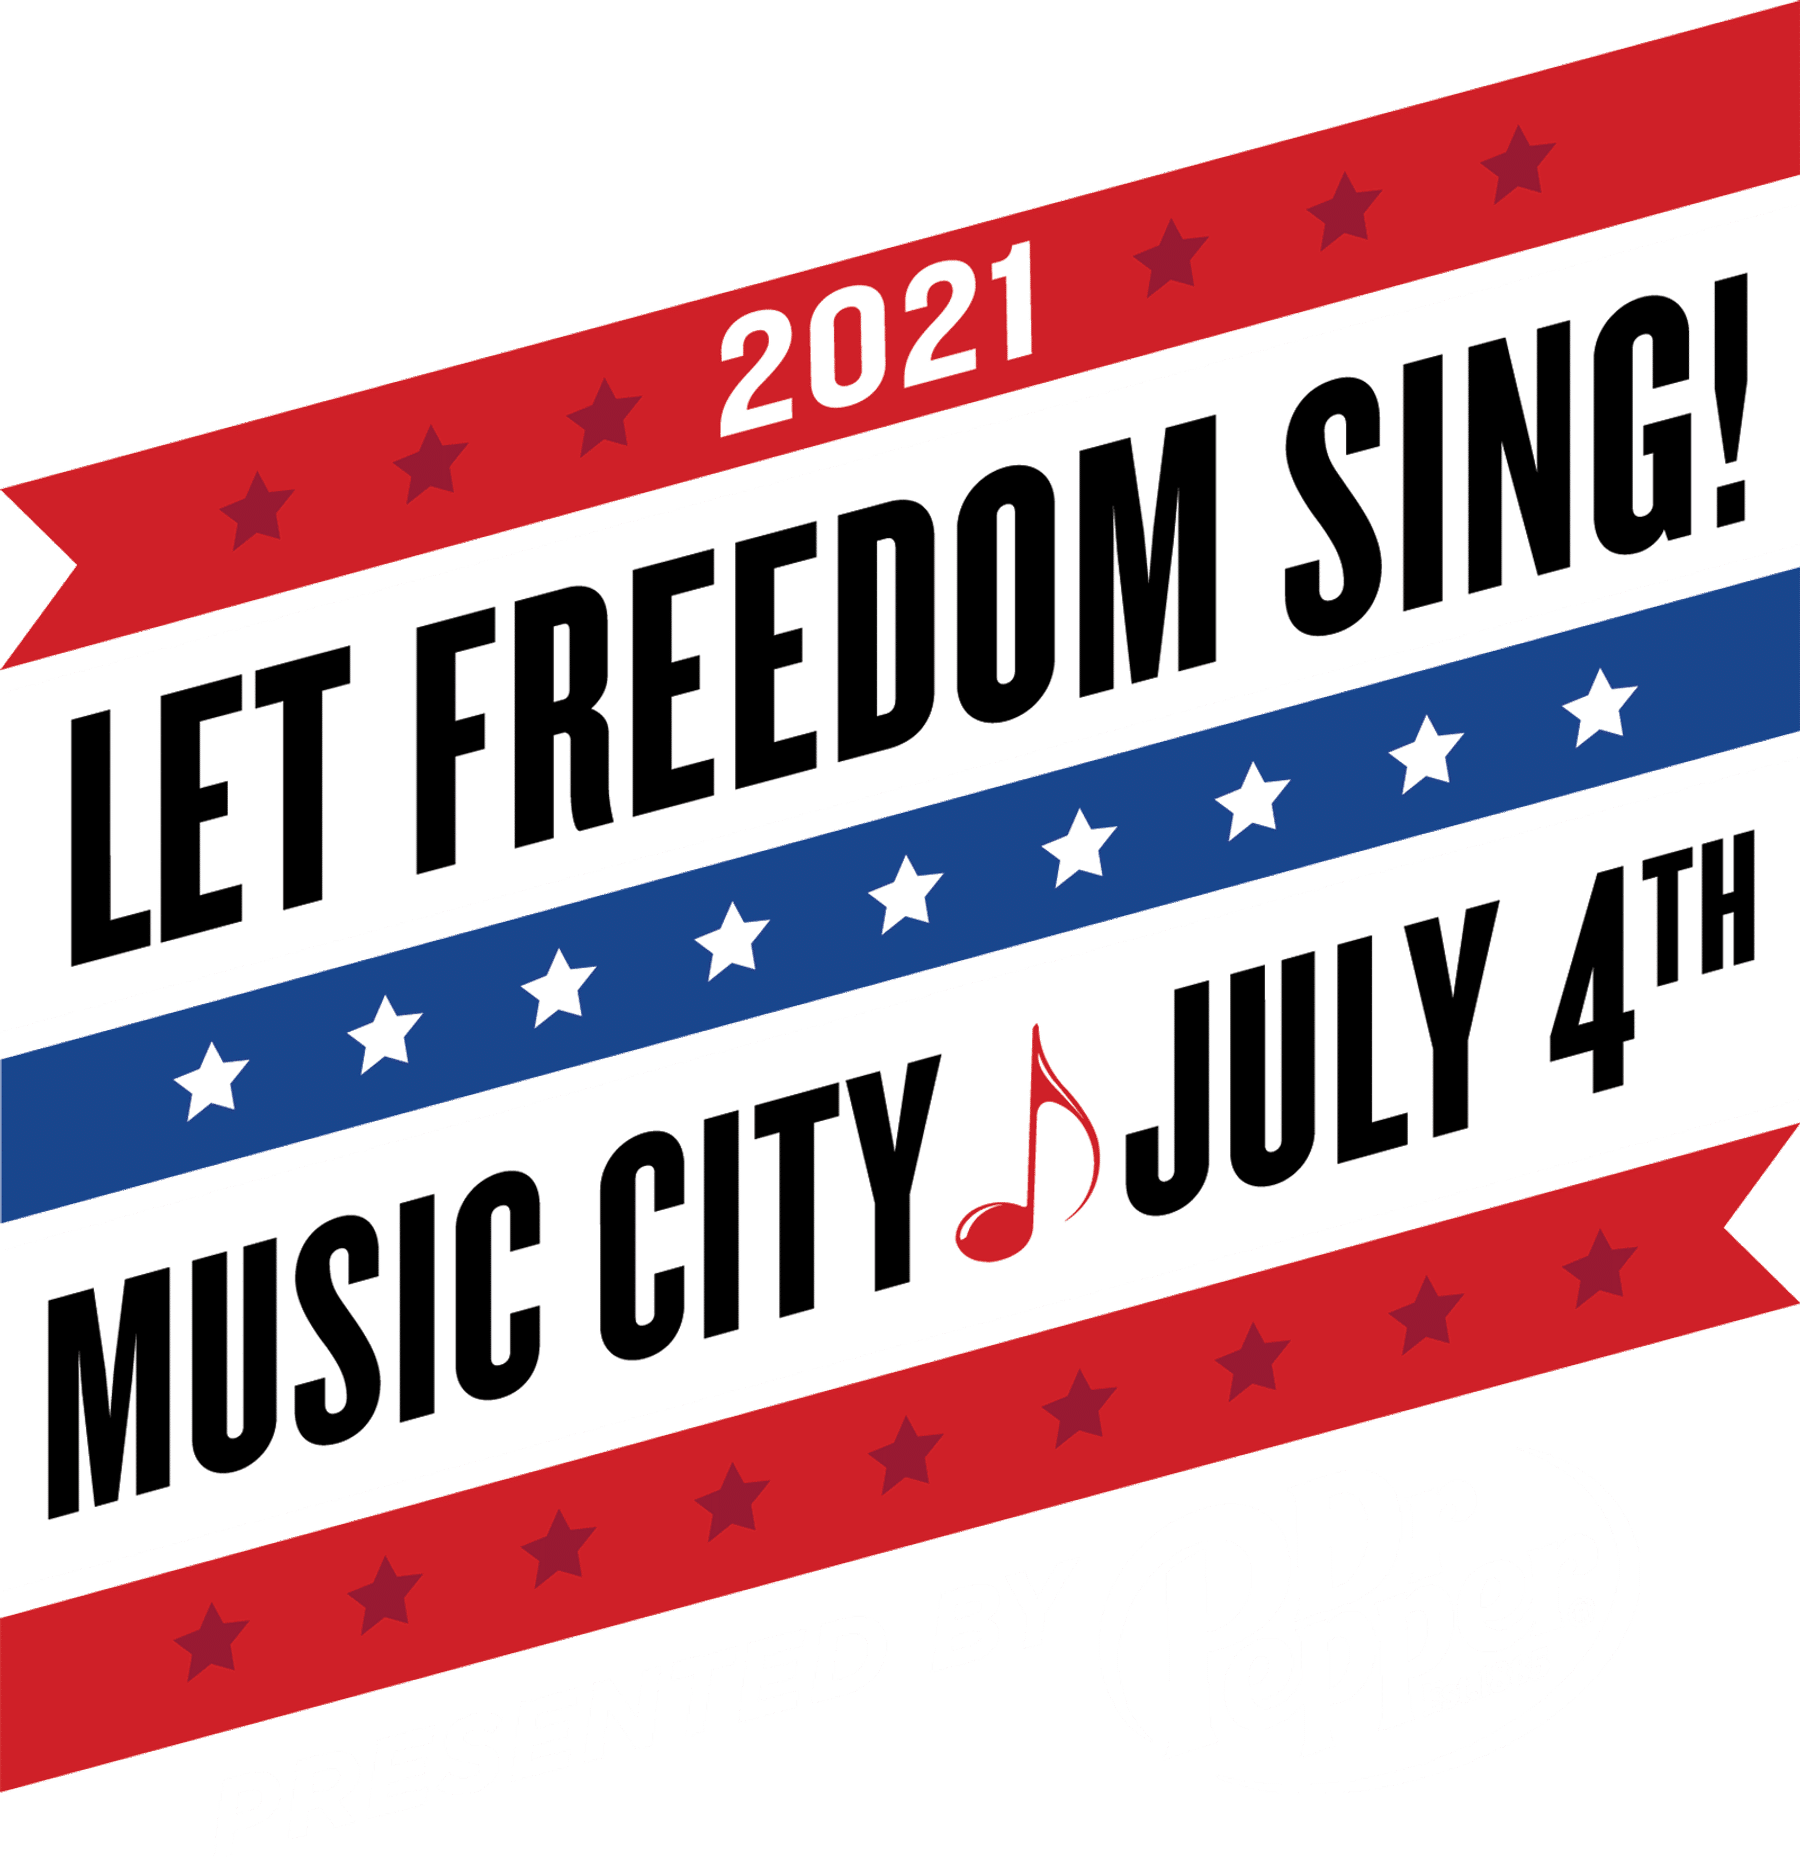 Let Freedom Sing! Music City July 4th Downtown Nashville